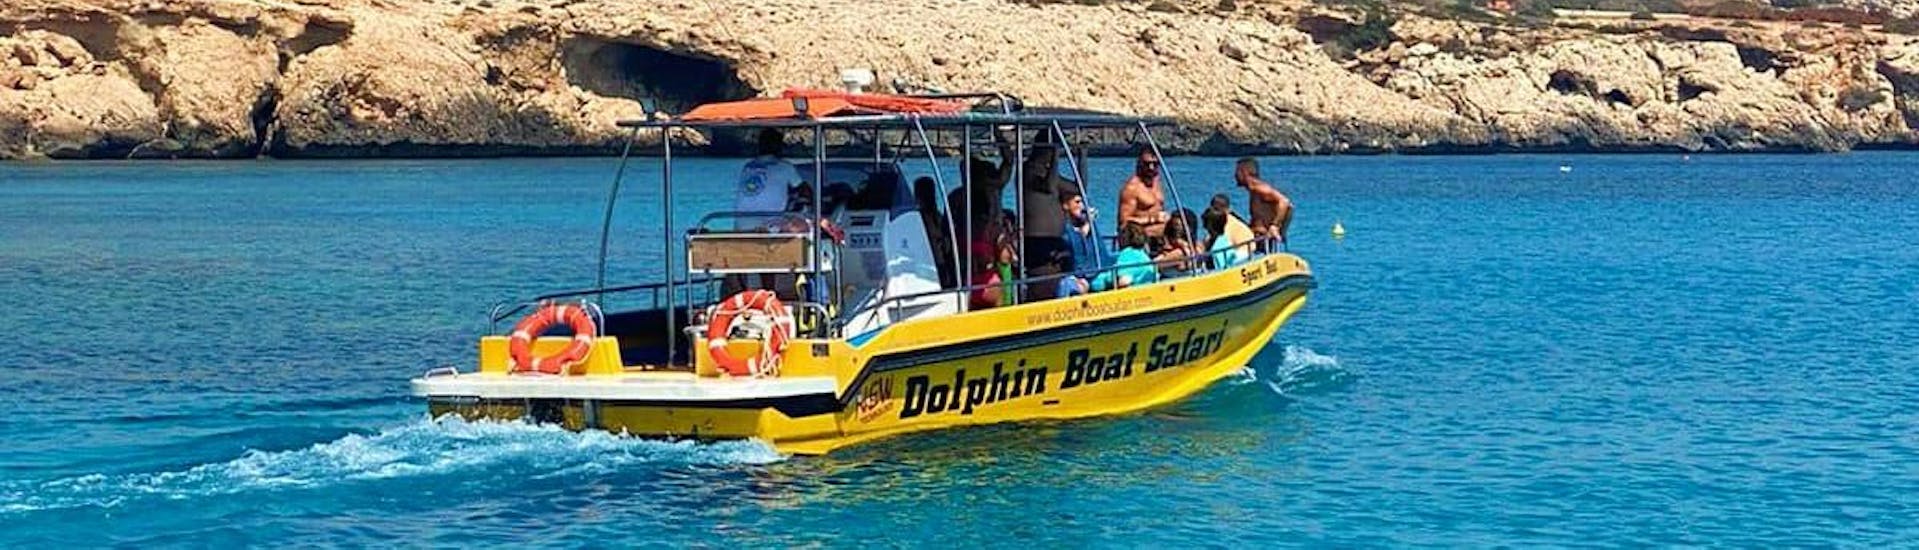 A motorboat from Dolphin Boat Safari, navigating in the stunning coast of Ayia Napa.